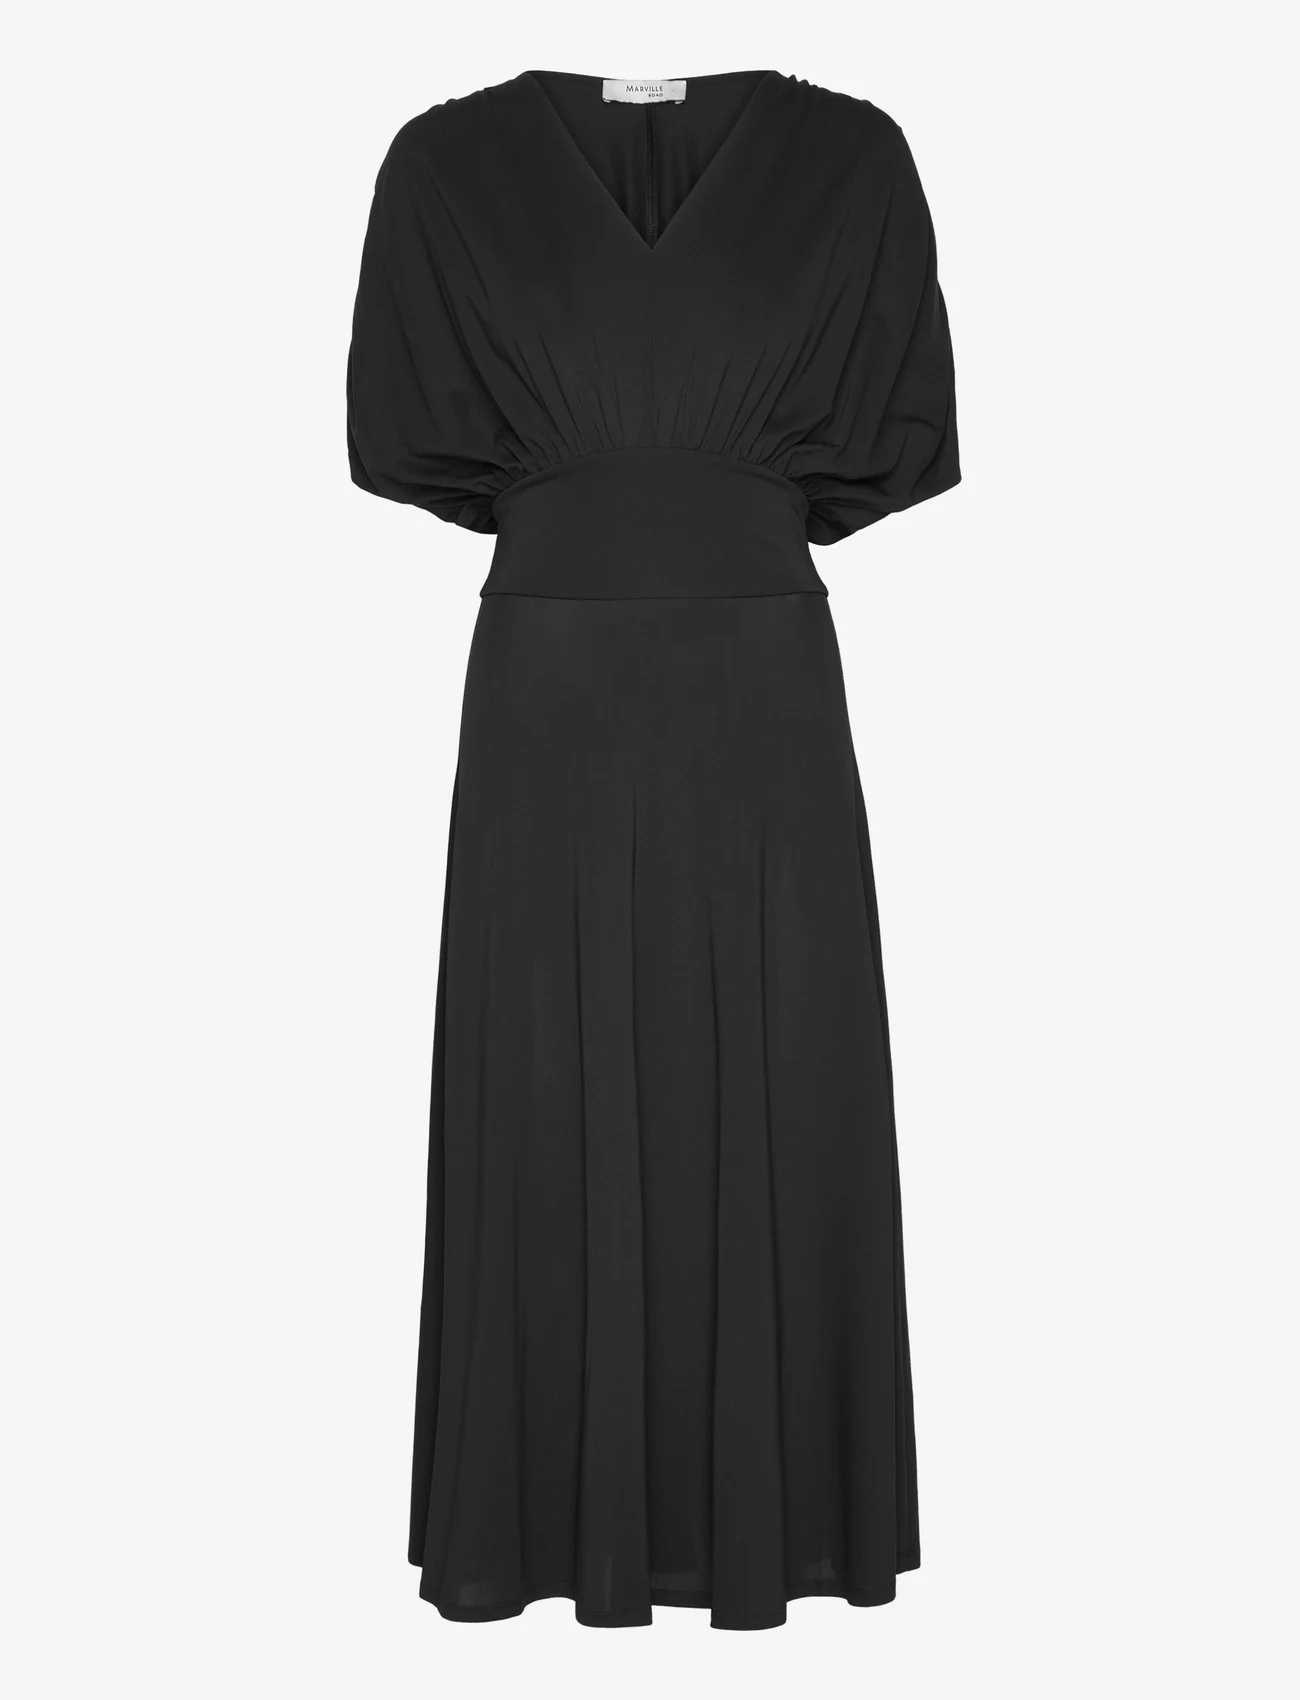 Marville Road - Carrie Jersey Dress - black - 0